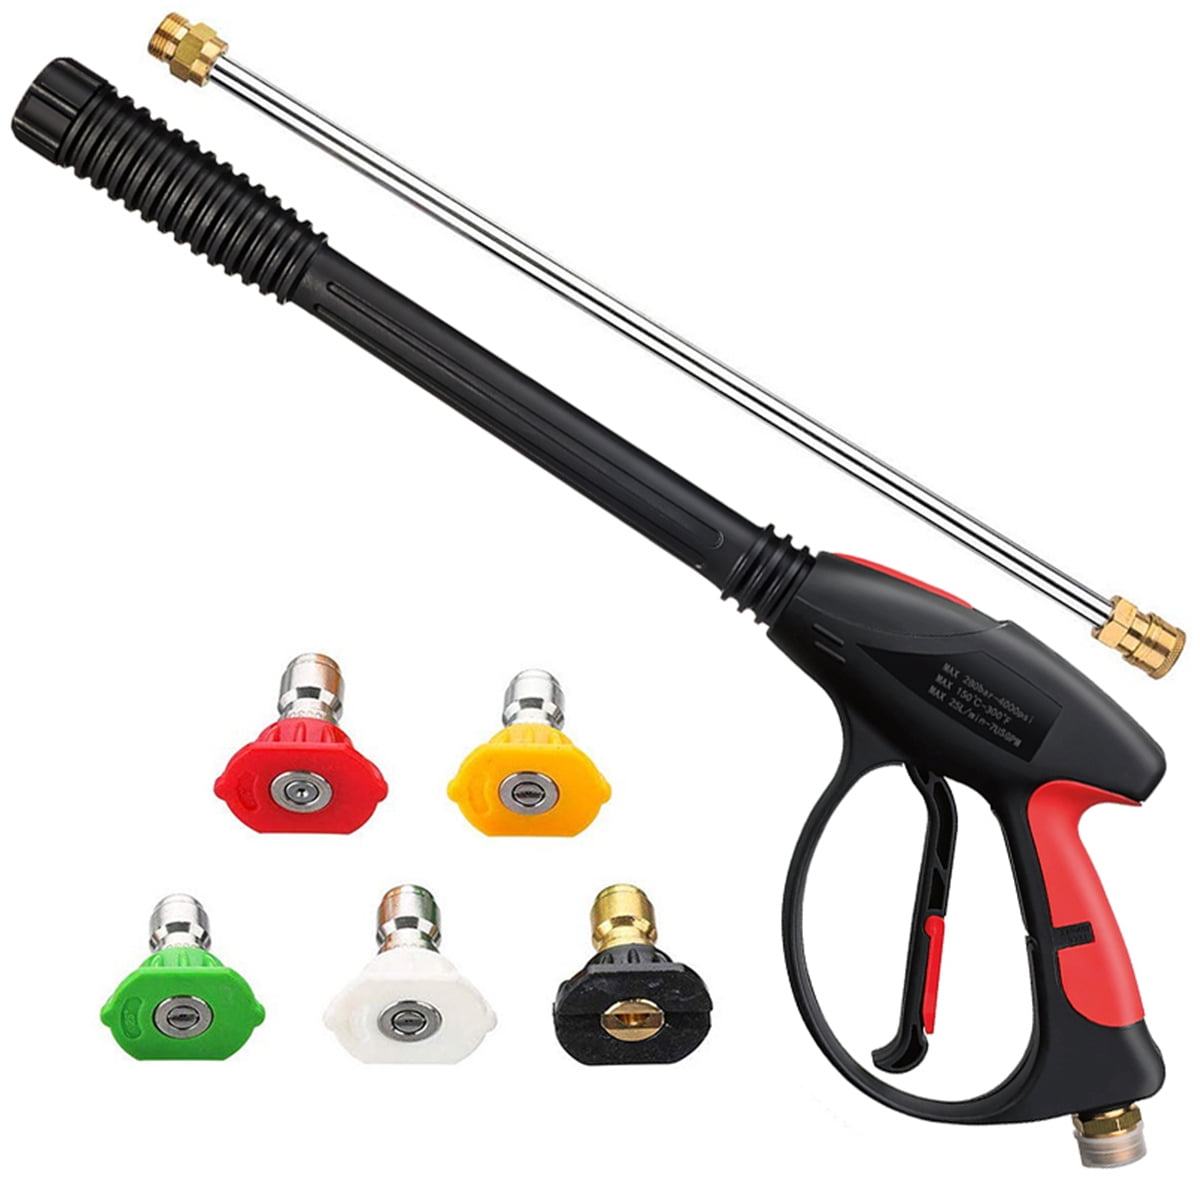 4000 PSI High Pressure Washer Hose Gun Wand Lance Spray Tips Turbo Nozzle 25 ft 